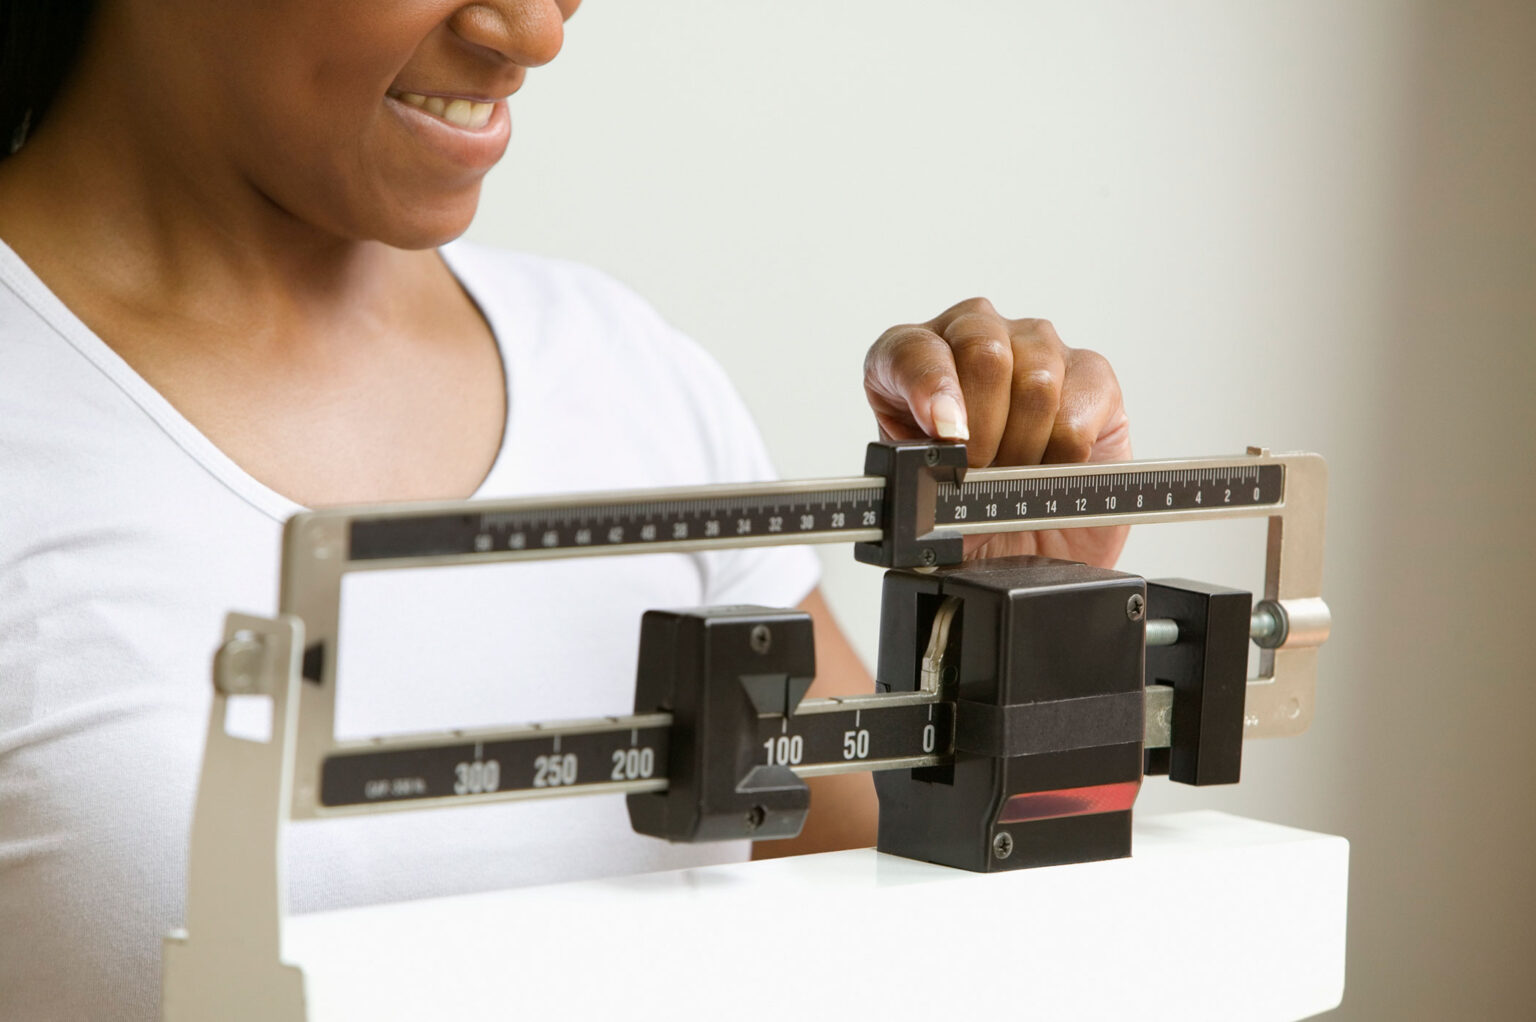 Current medical training focuses on weight and body mass index, exacerbating anti-obesity bias and increasing the risk of eating disorders, according to a new paper from the University of Georgia. (Getty Images)